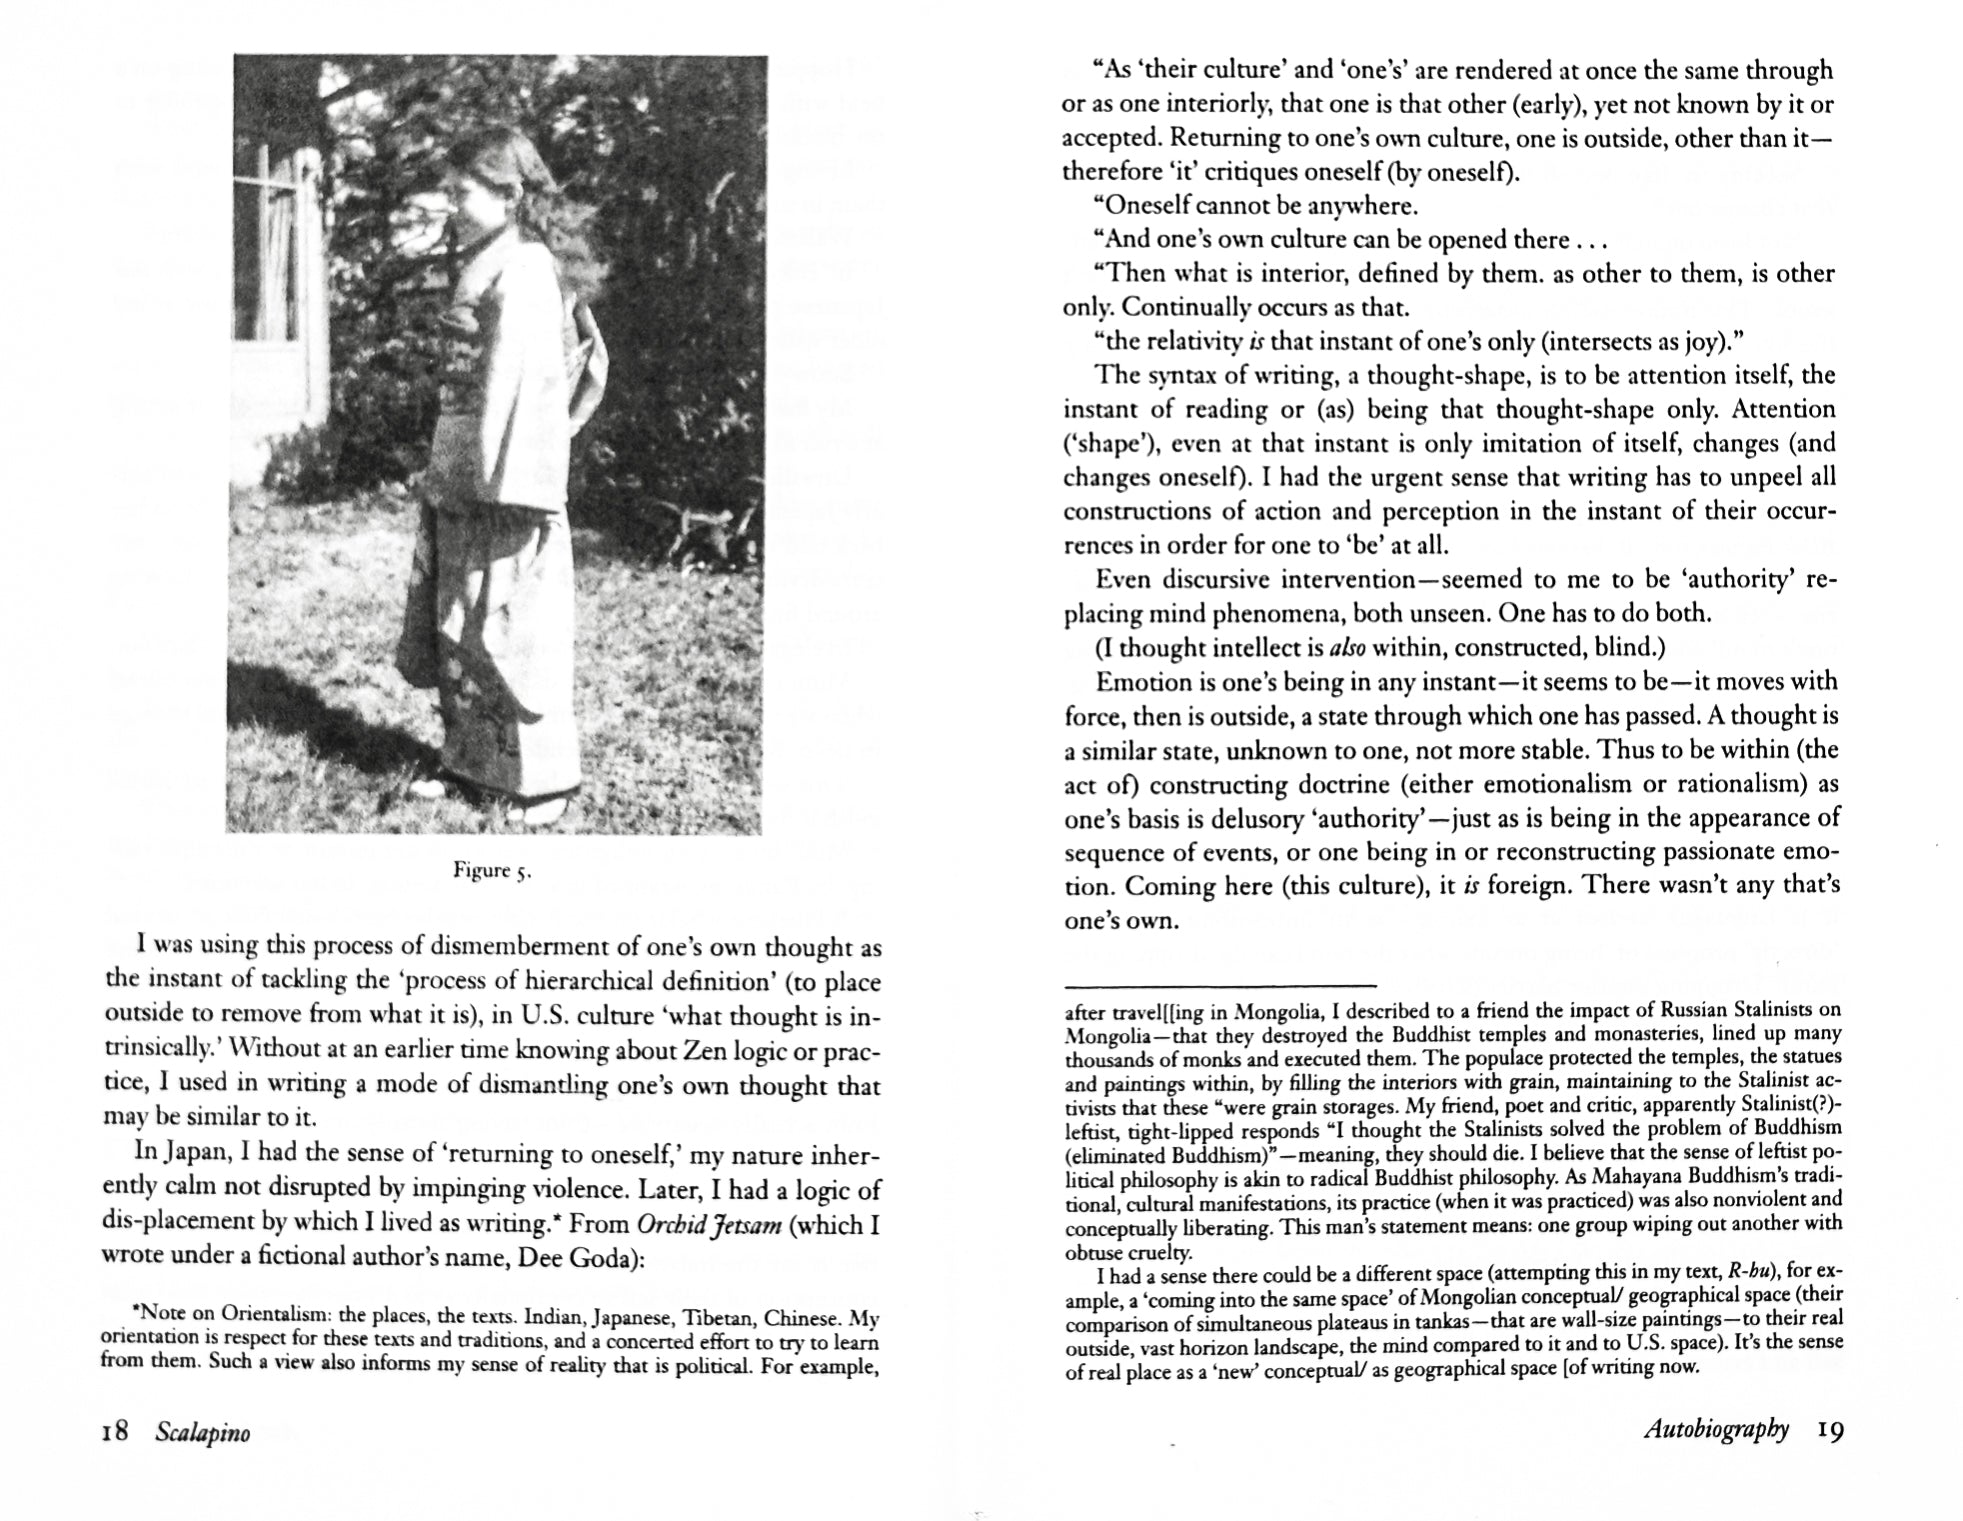 Two columns of text in black letters spread over a white page with a photography of a girl on the left upper side entitled “Figure 5.“ as well as a footnote block on the lower half third of the right page.